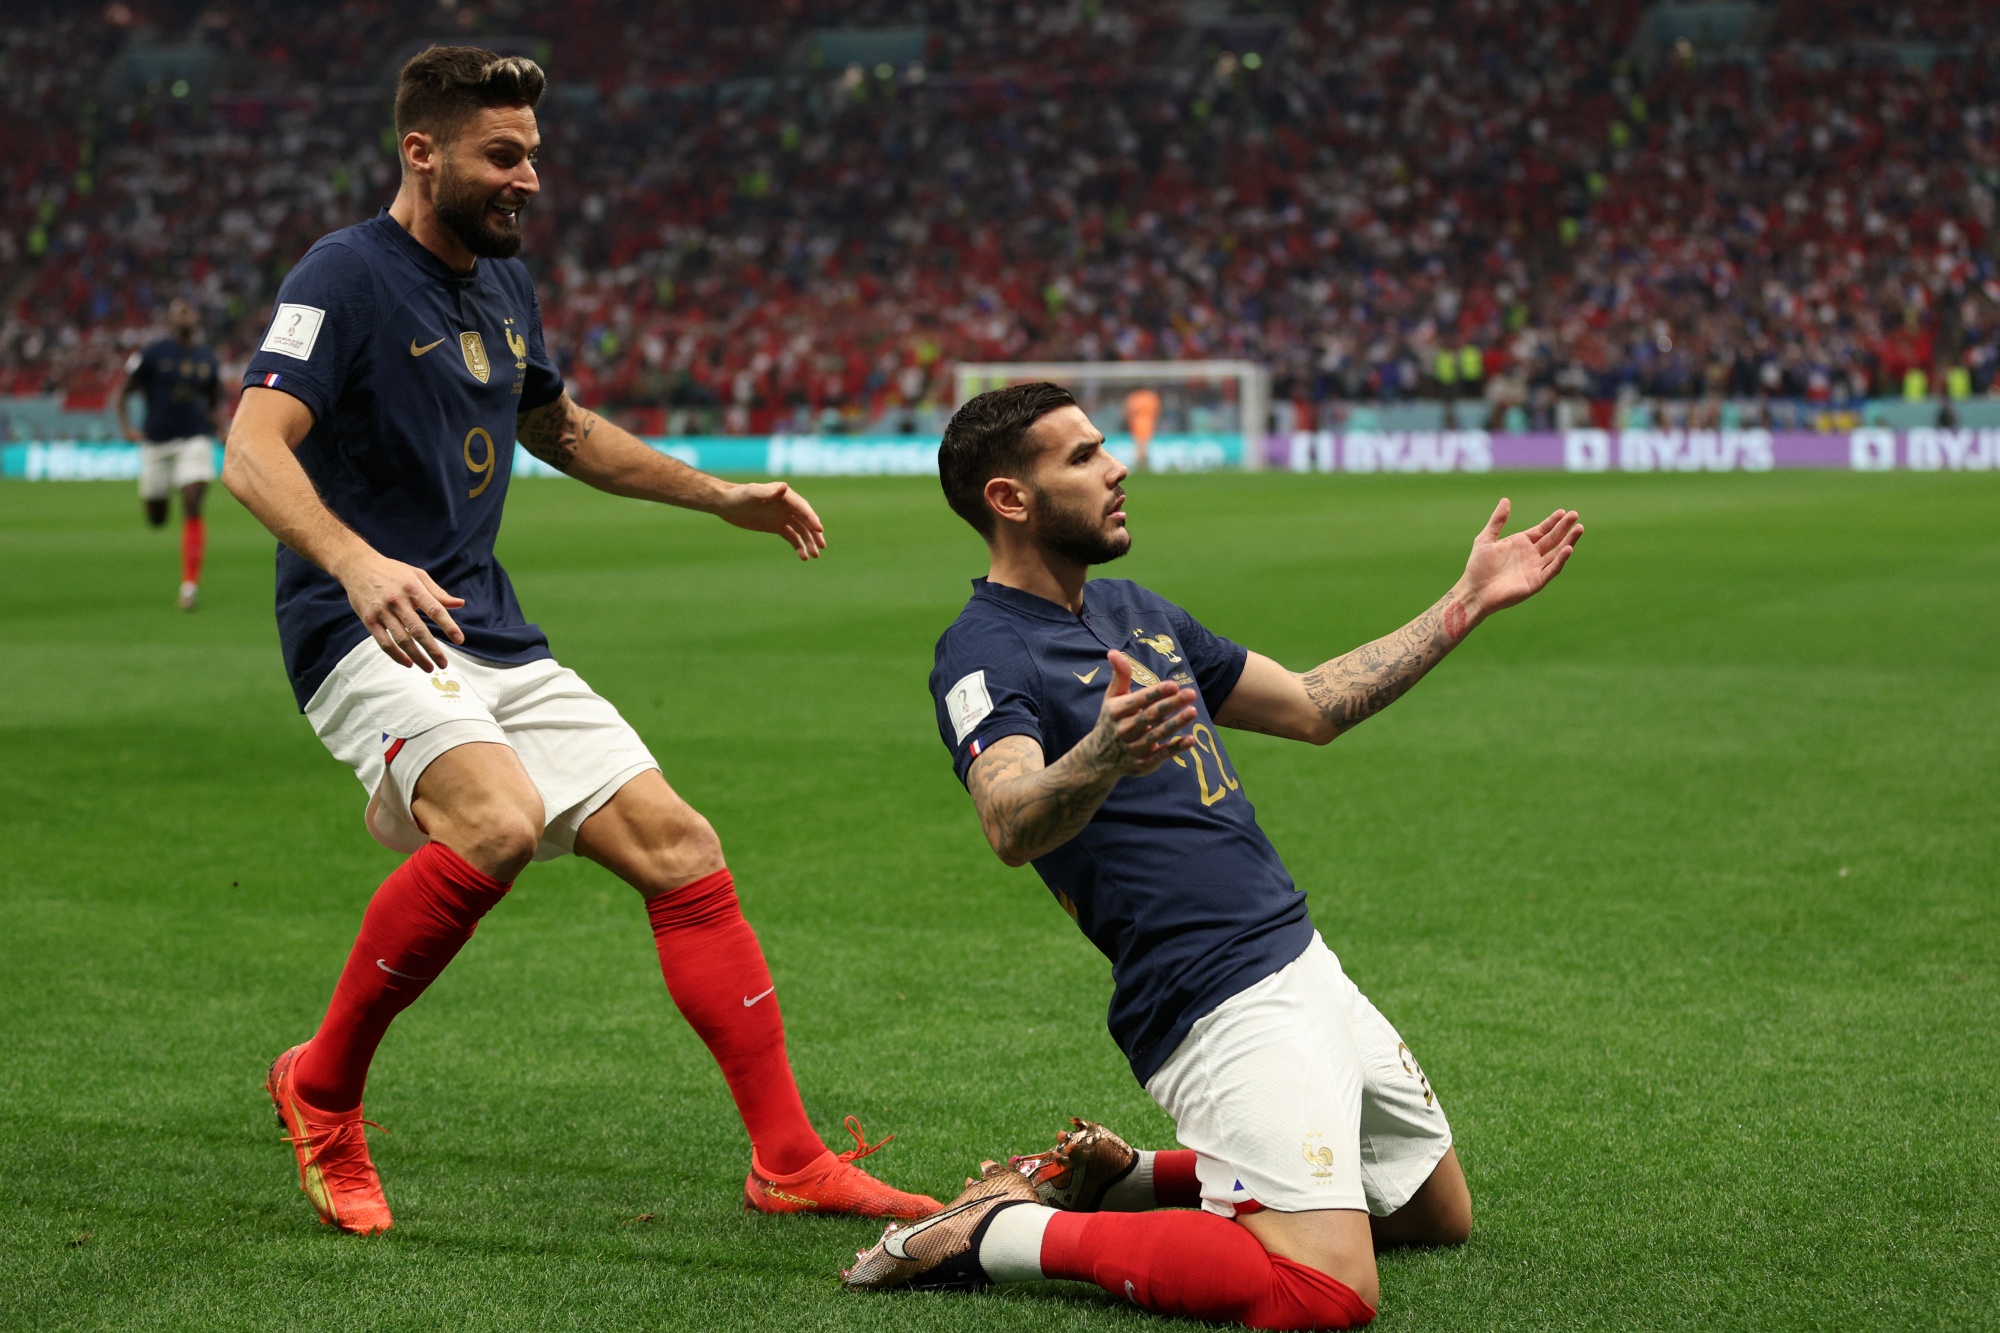 France's defender #22 Theo Hernandez celebrates with France's forward #09 Olivier Giroud after scoring his team's first goal during the Qatar 2022 World Cup semi-final football match between France and Morocco at the Al-Bayt Stadium in Al Khor, north of Doha on December 14, 2022. (Photo by Adrian DENNIS / AFP)